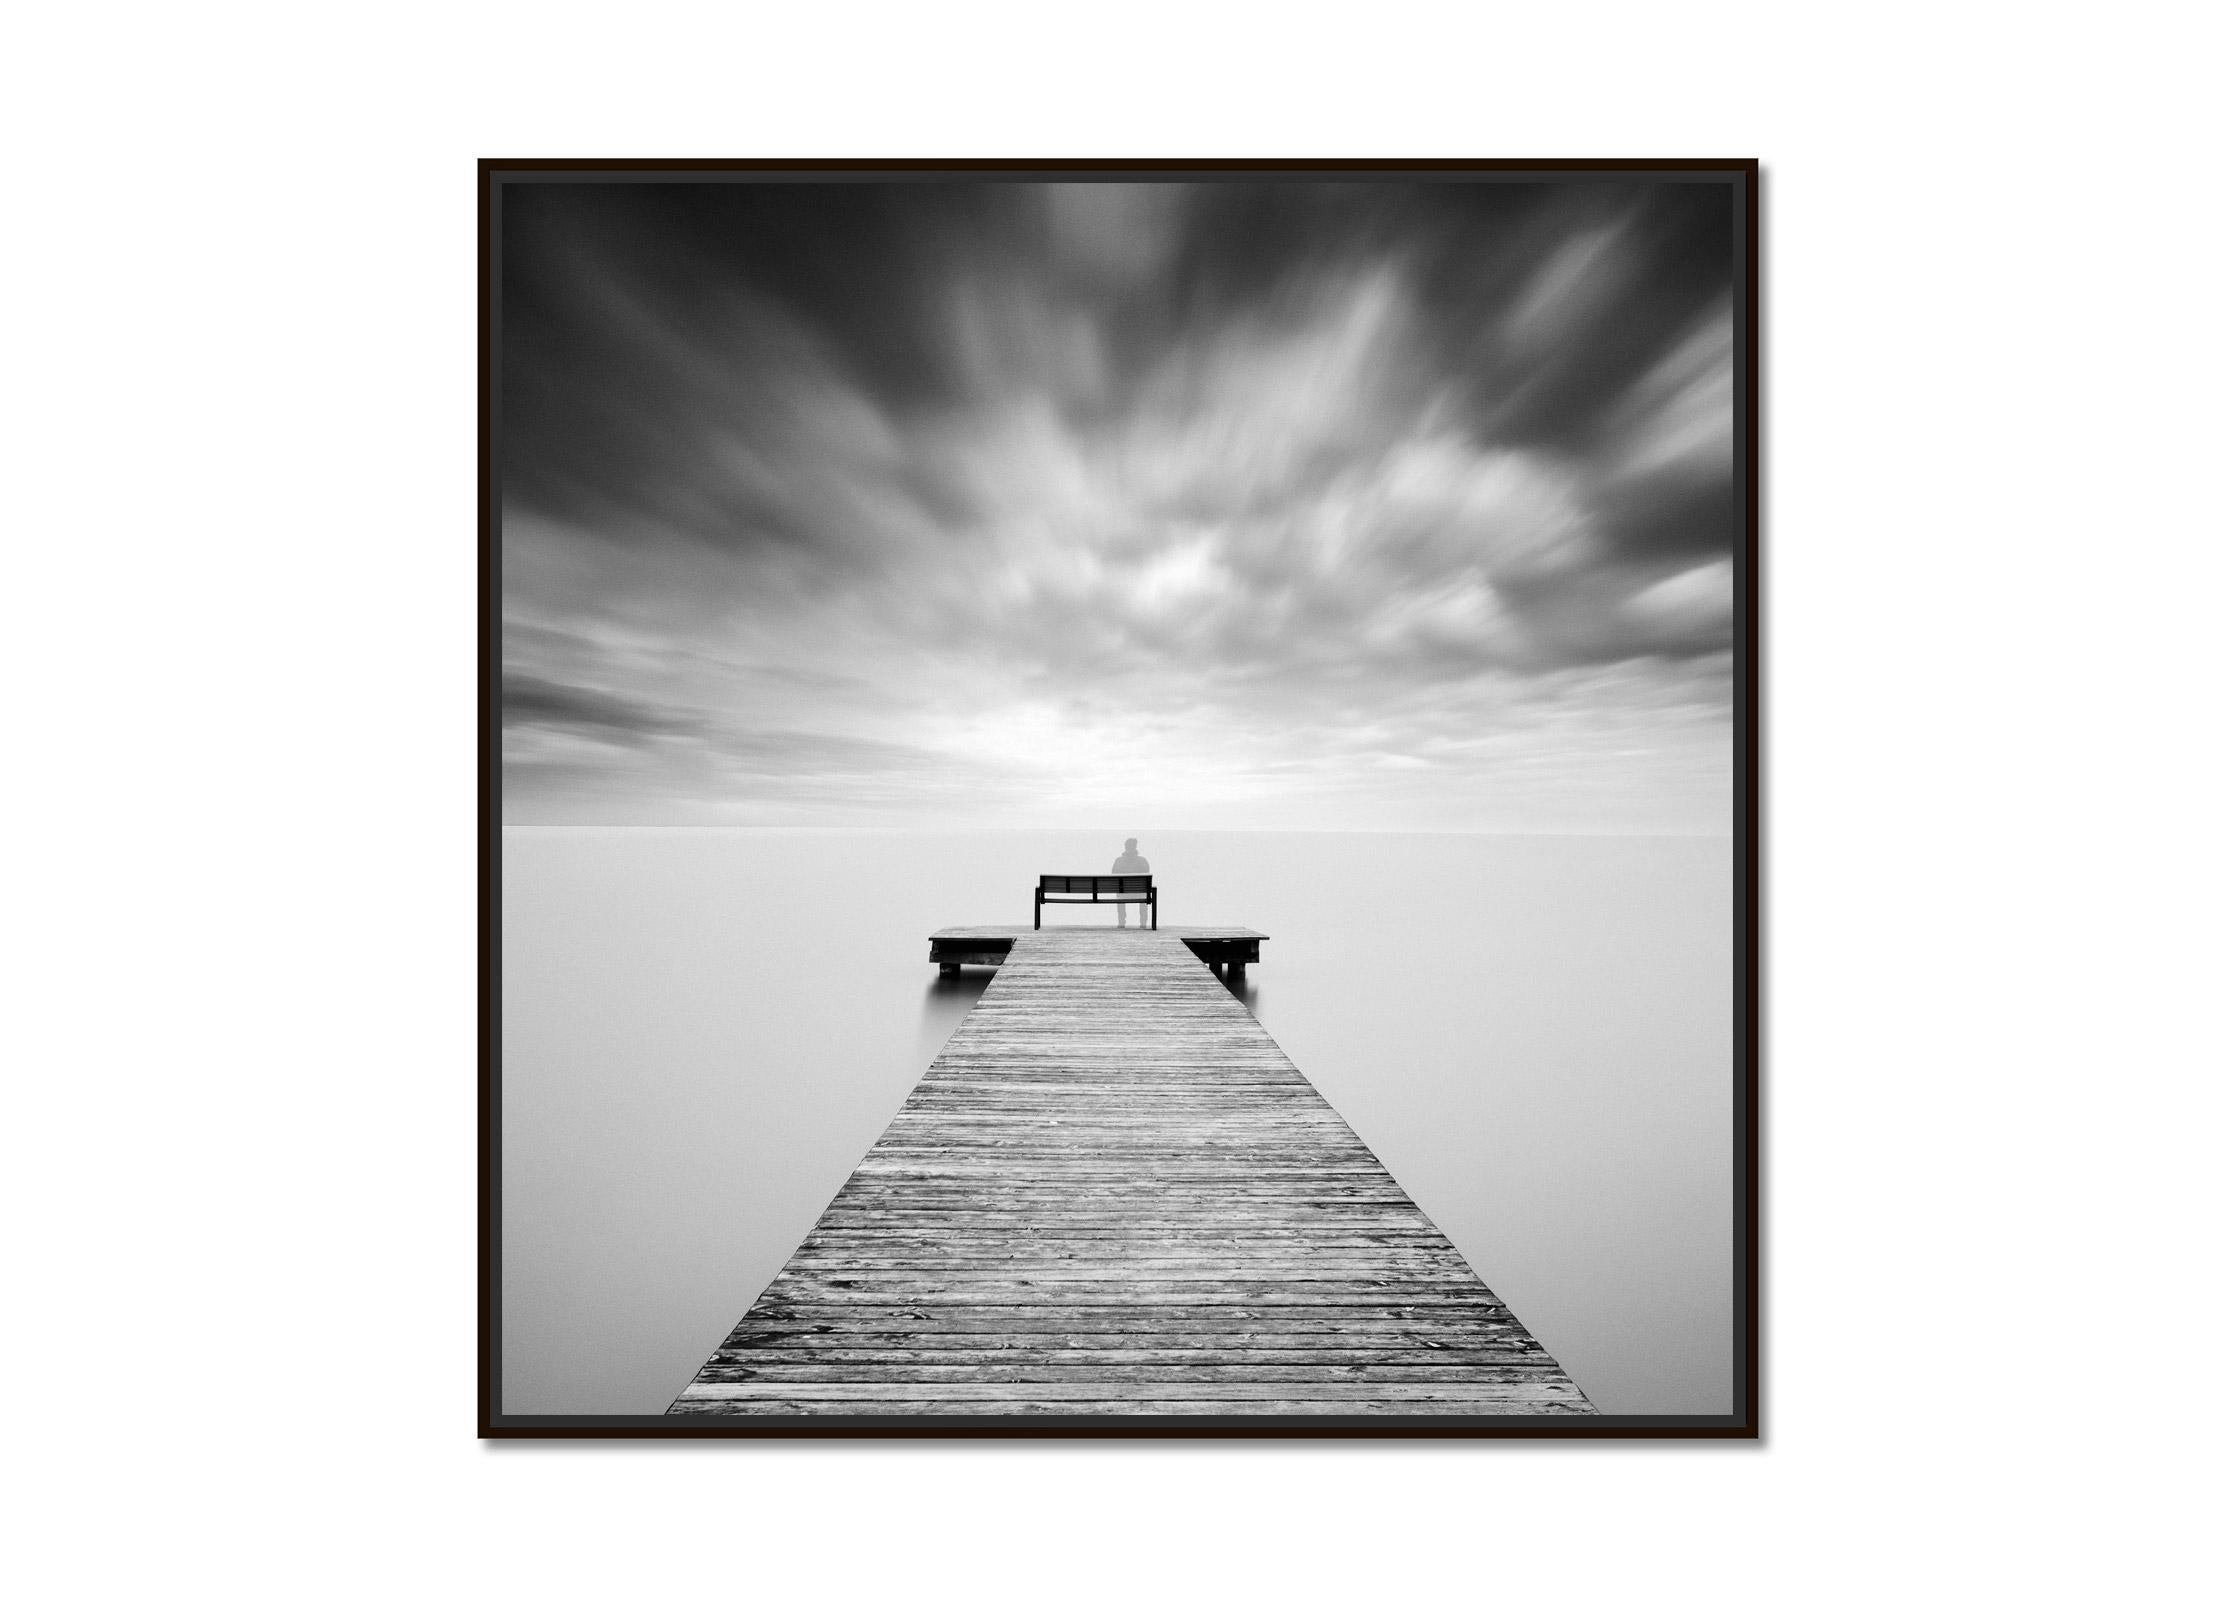 Self Portrait, lake, storm, black and white long exposure waterscape photography - Photograph by Gerald Berghammer